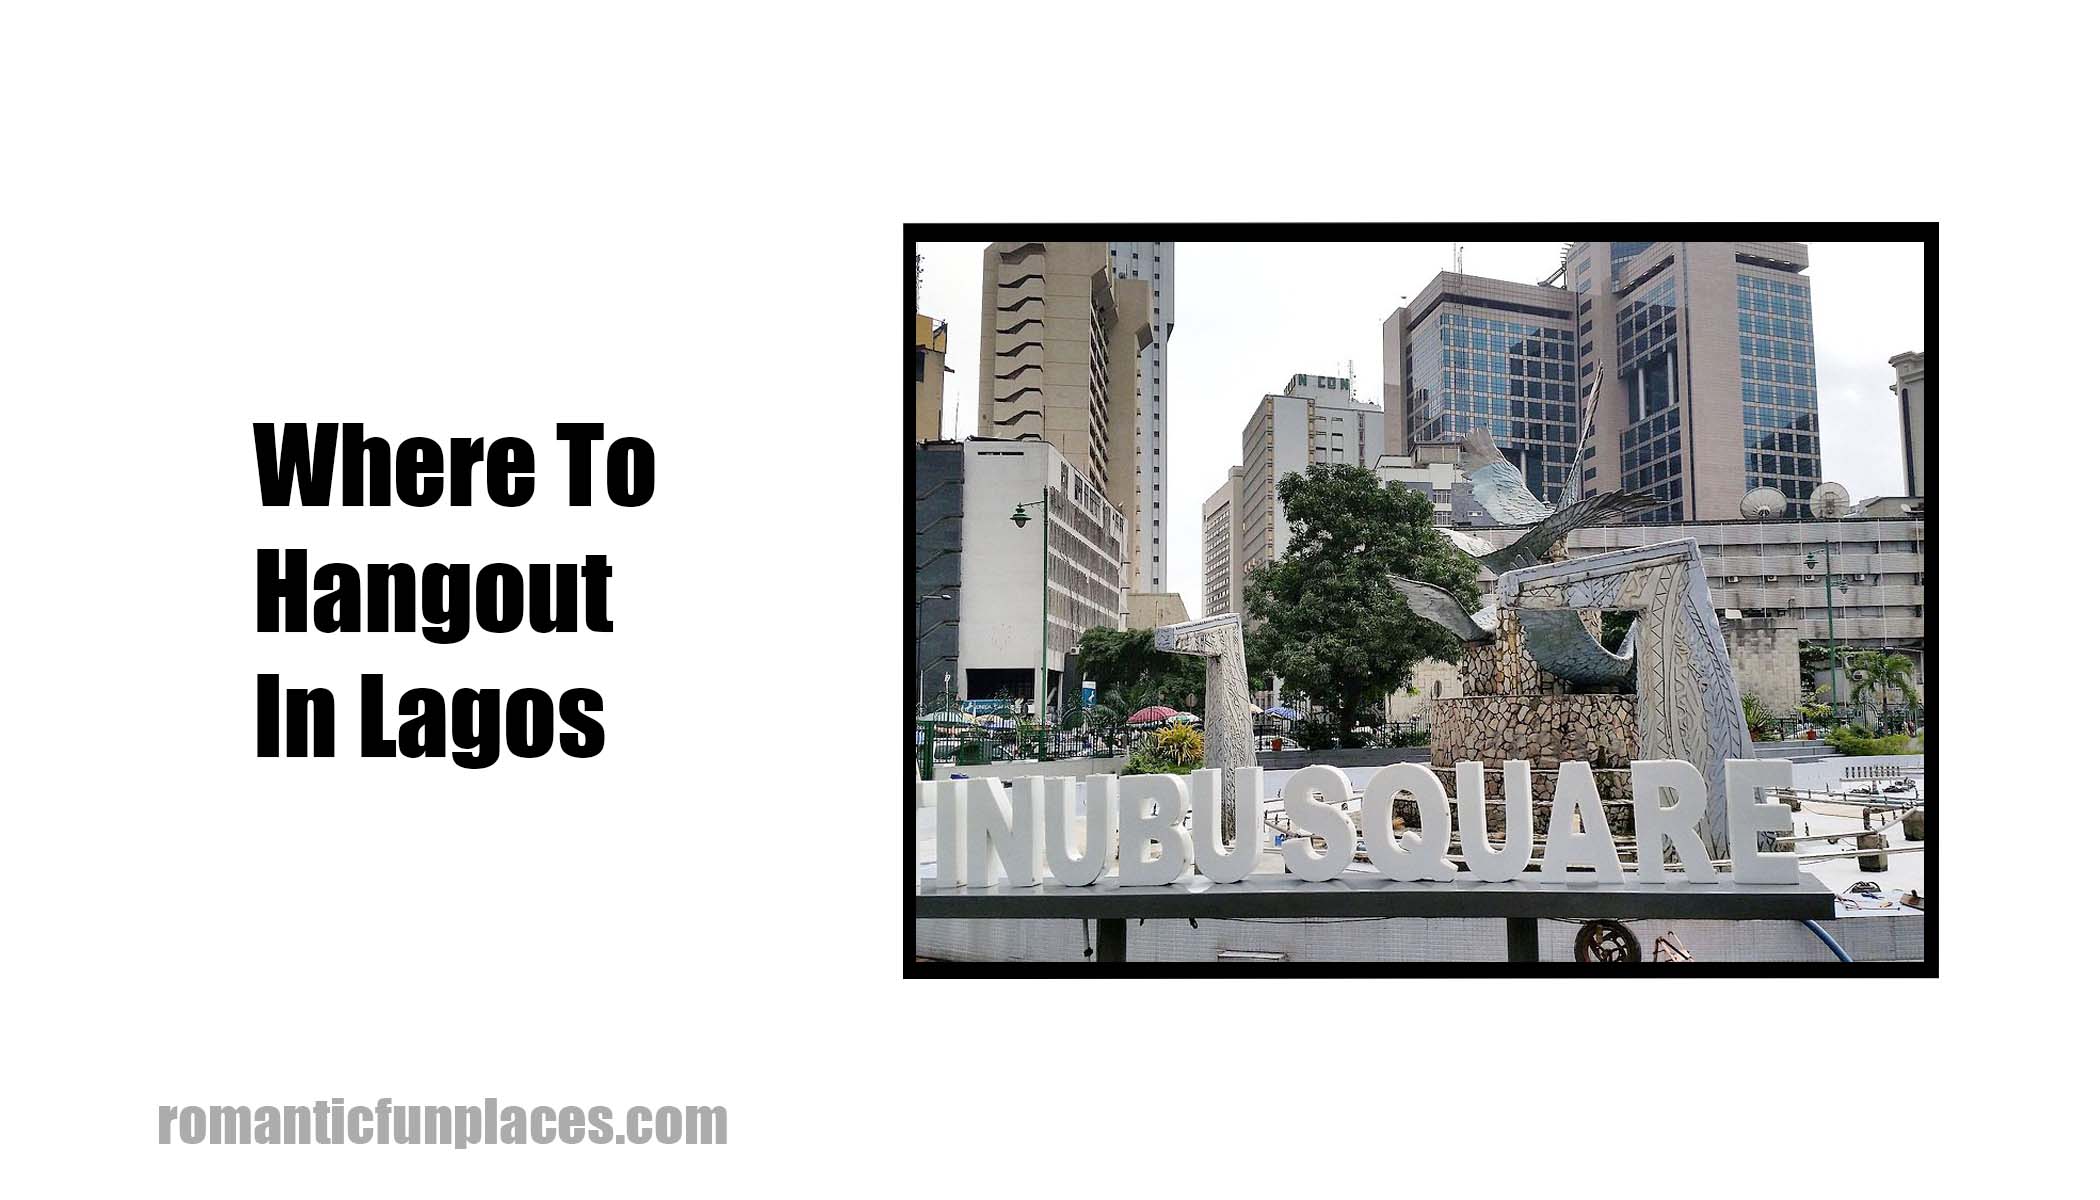 Where To Hangout In Lagos